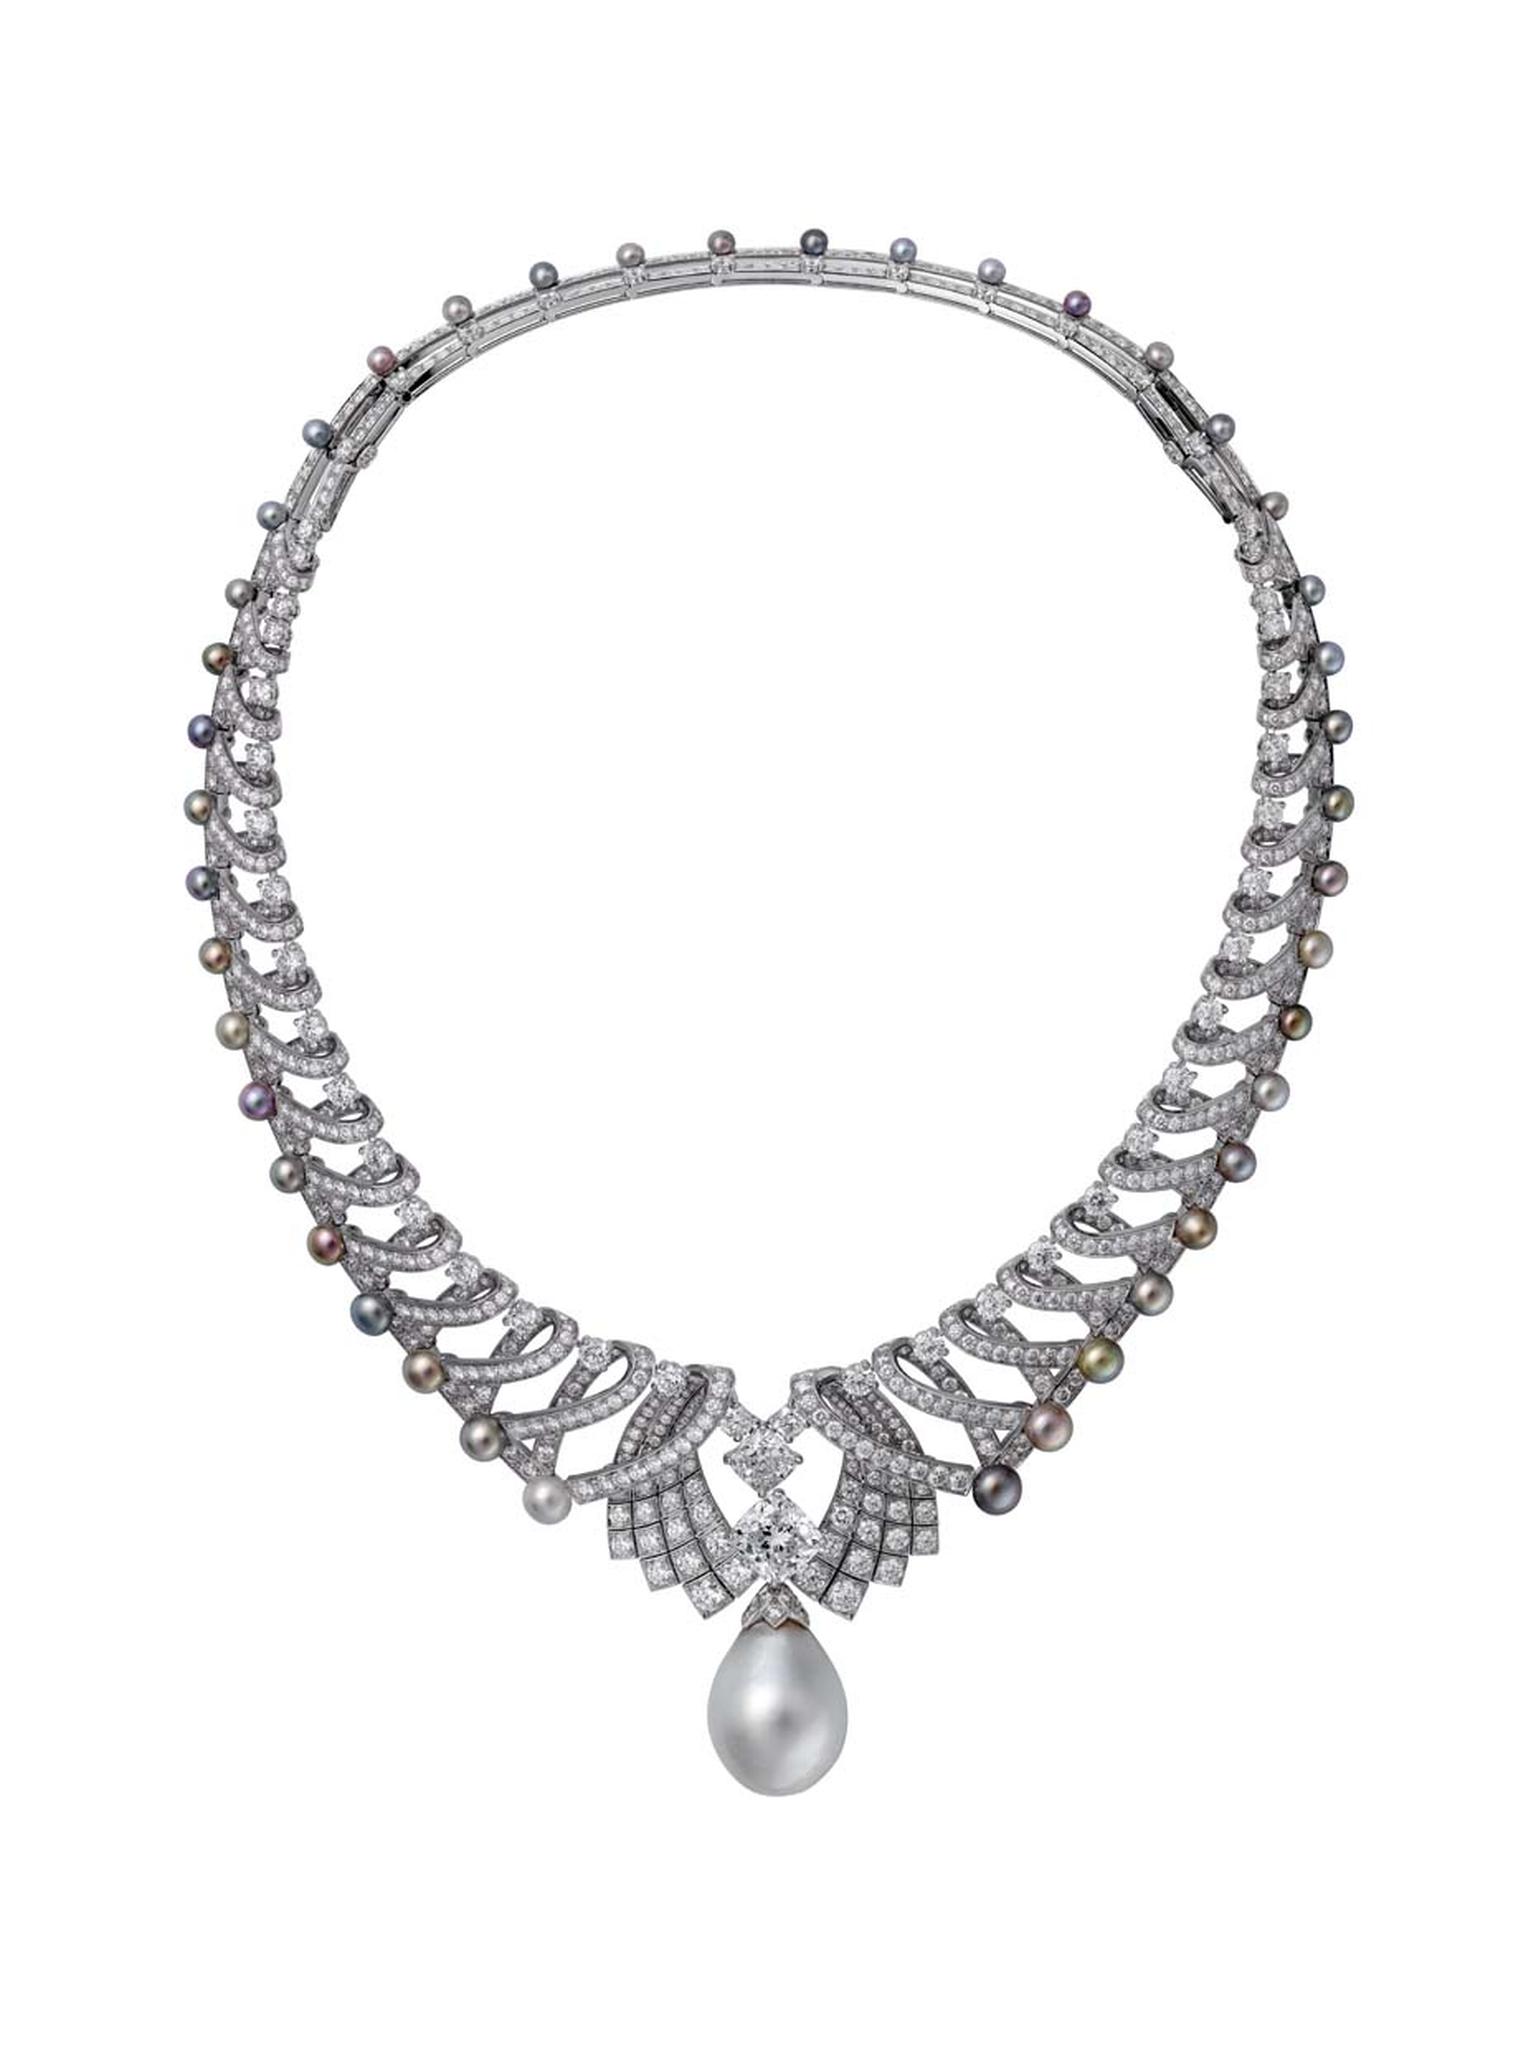 Thanks to an innovative sliding system, Cartier has created a transformable piece of jewellery that will be presented at the 2014 Biennale des Antiquaires and can be worn as a tiara or a necklace.